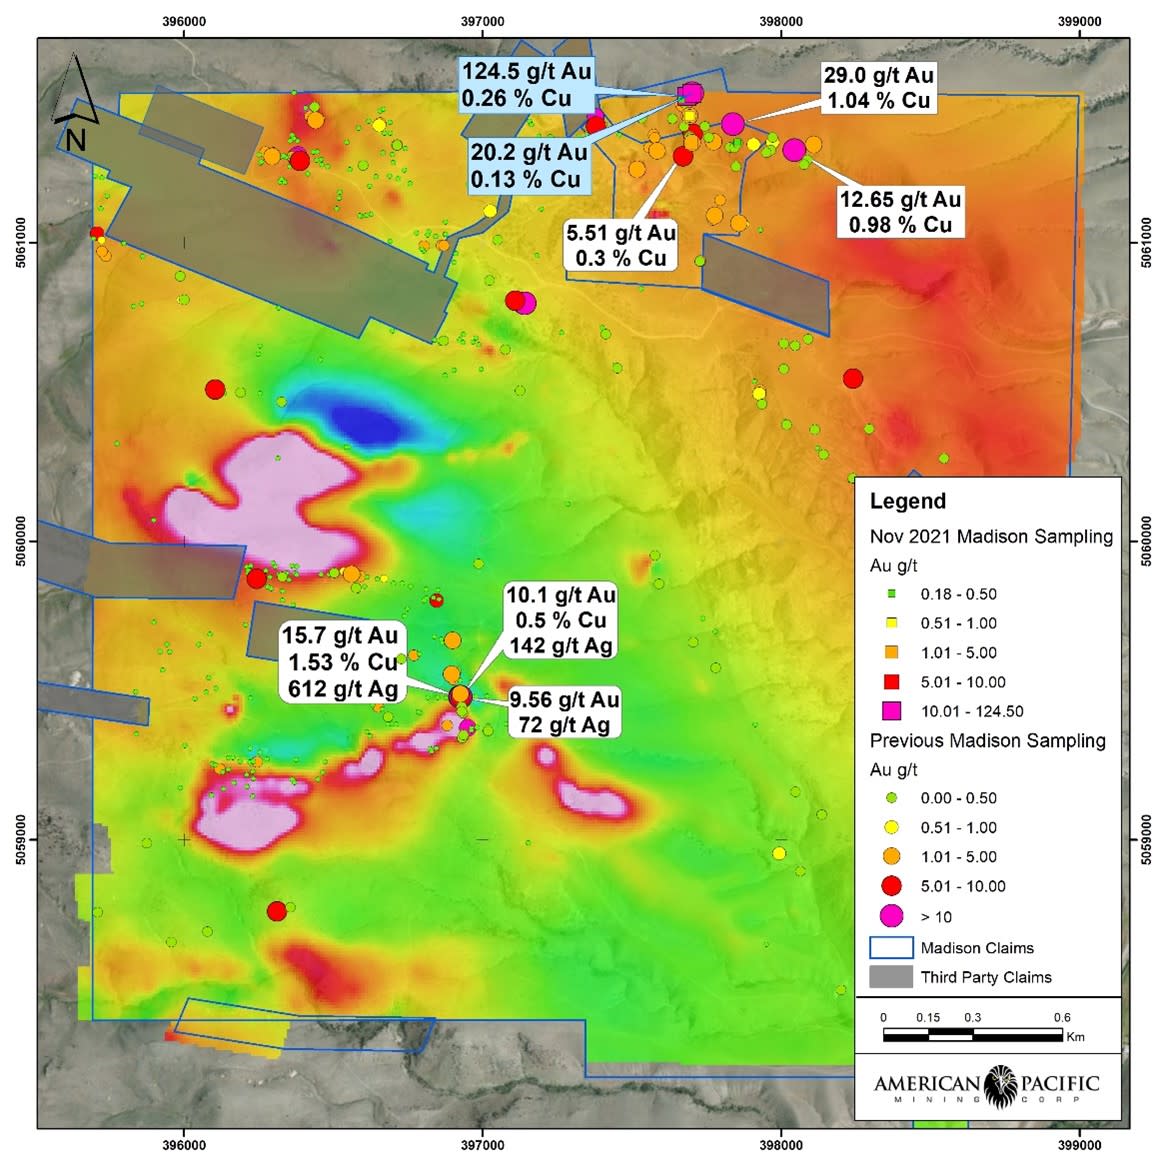 American Pacific Mining Defines Several Exploration Targets from Drone Magnetic Survey at its Madison Copper-Gold Project in Montana